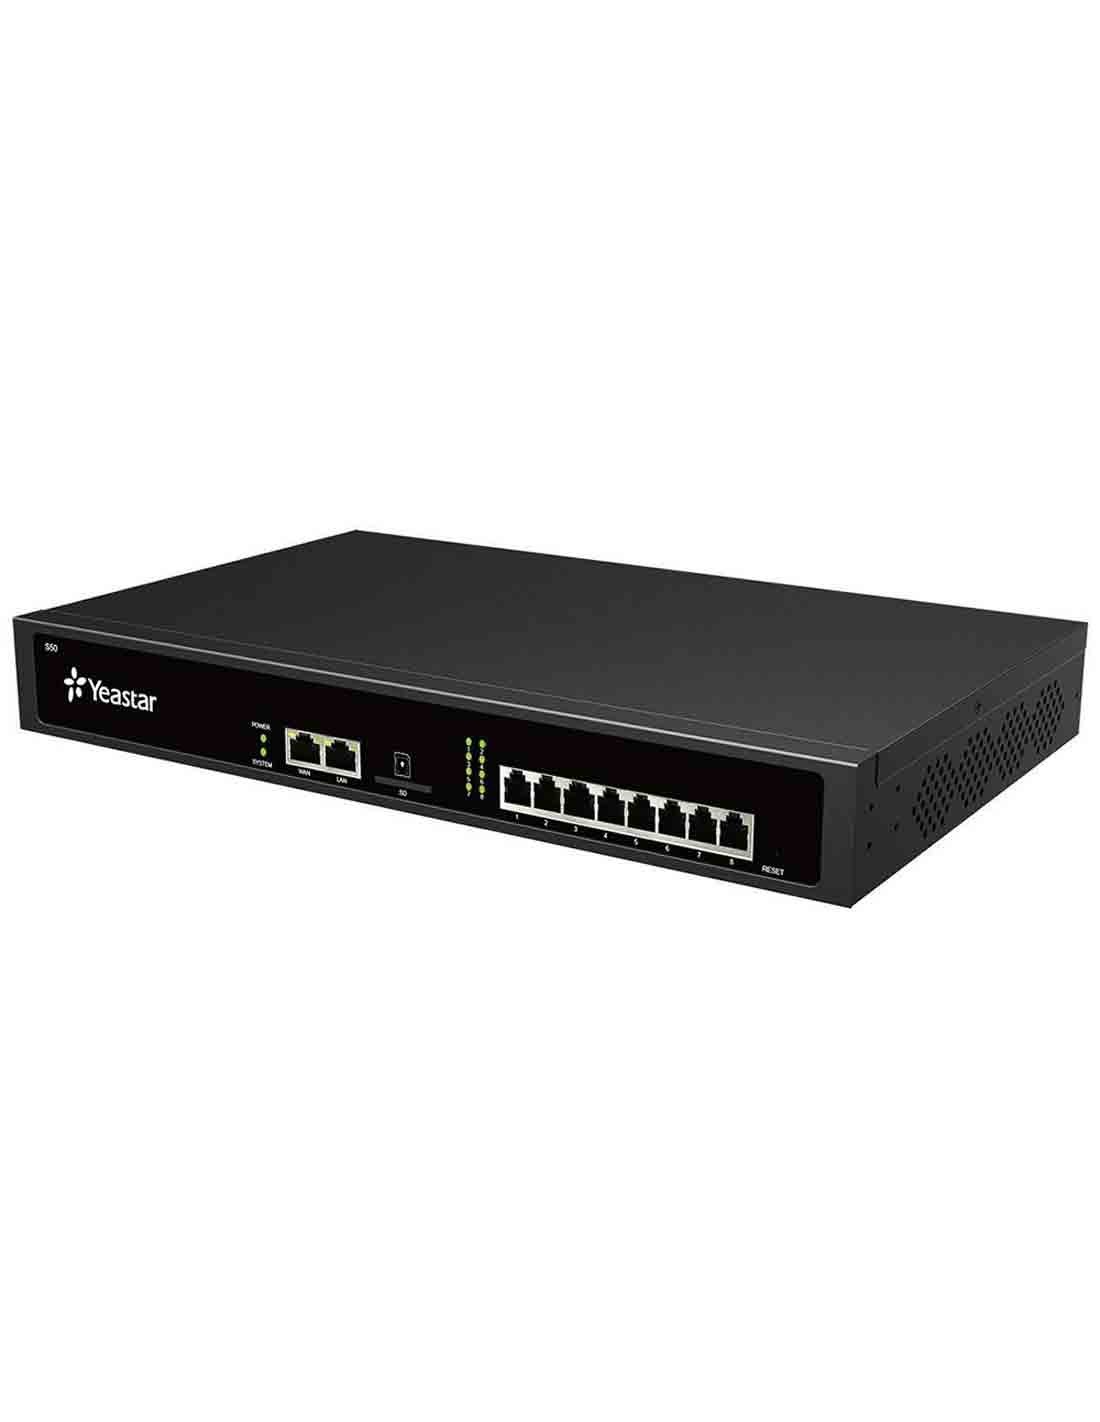 Buy Online Yeastar S50 50 Users 25 Concurrent Calls Modular IP-PBX at a Cheap Price in Dubai